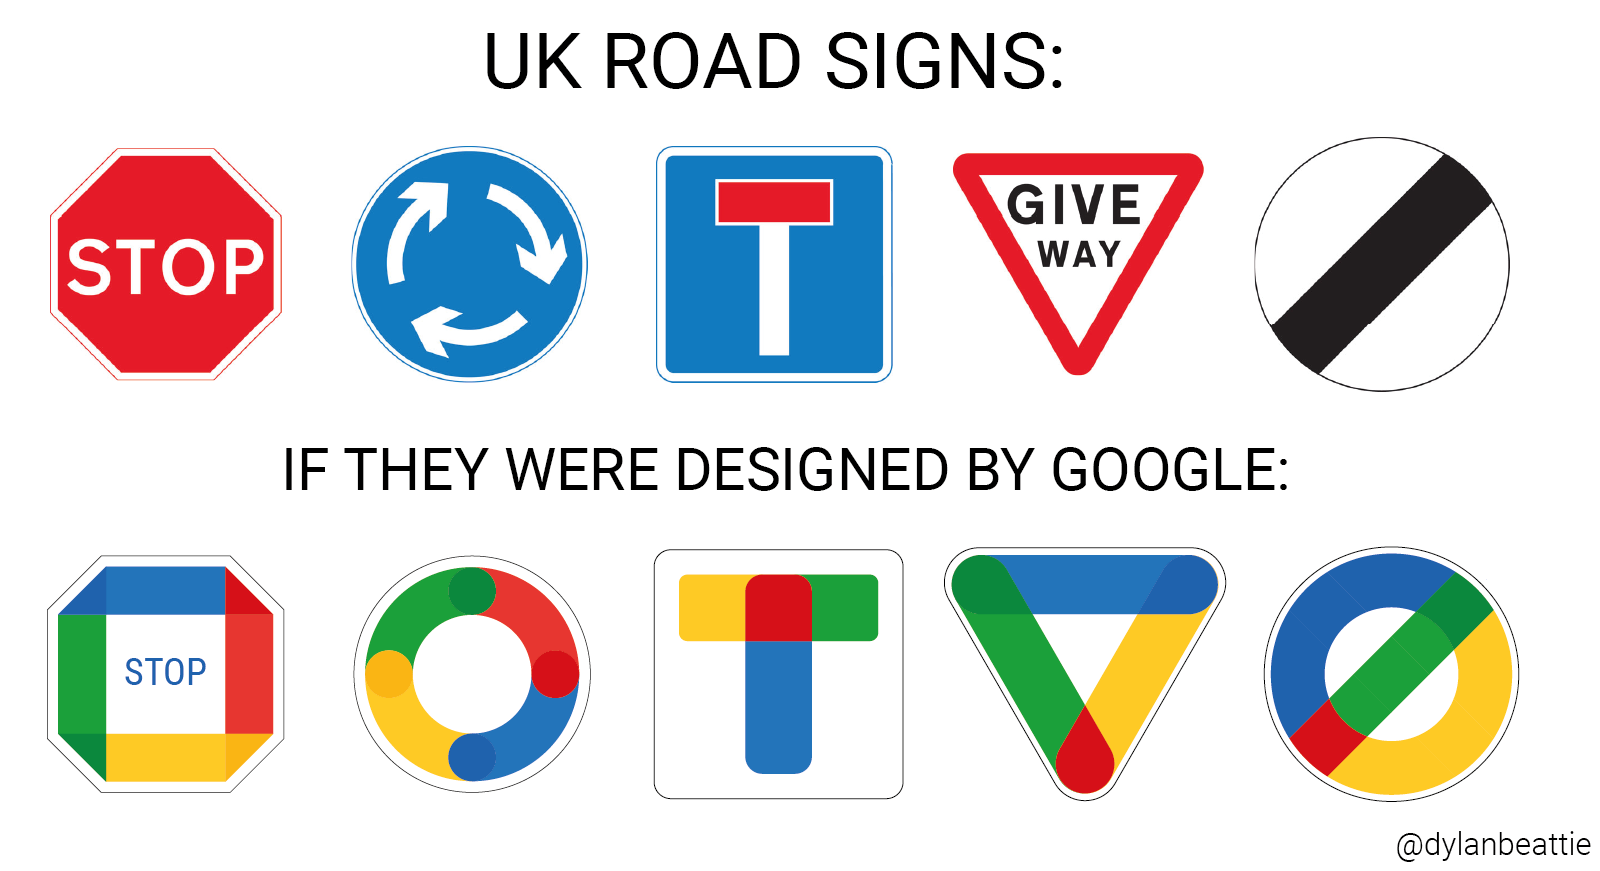 A mockup showing how five UK road signs might look if redesigned to reflect Google Workspace design conventions.